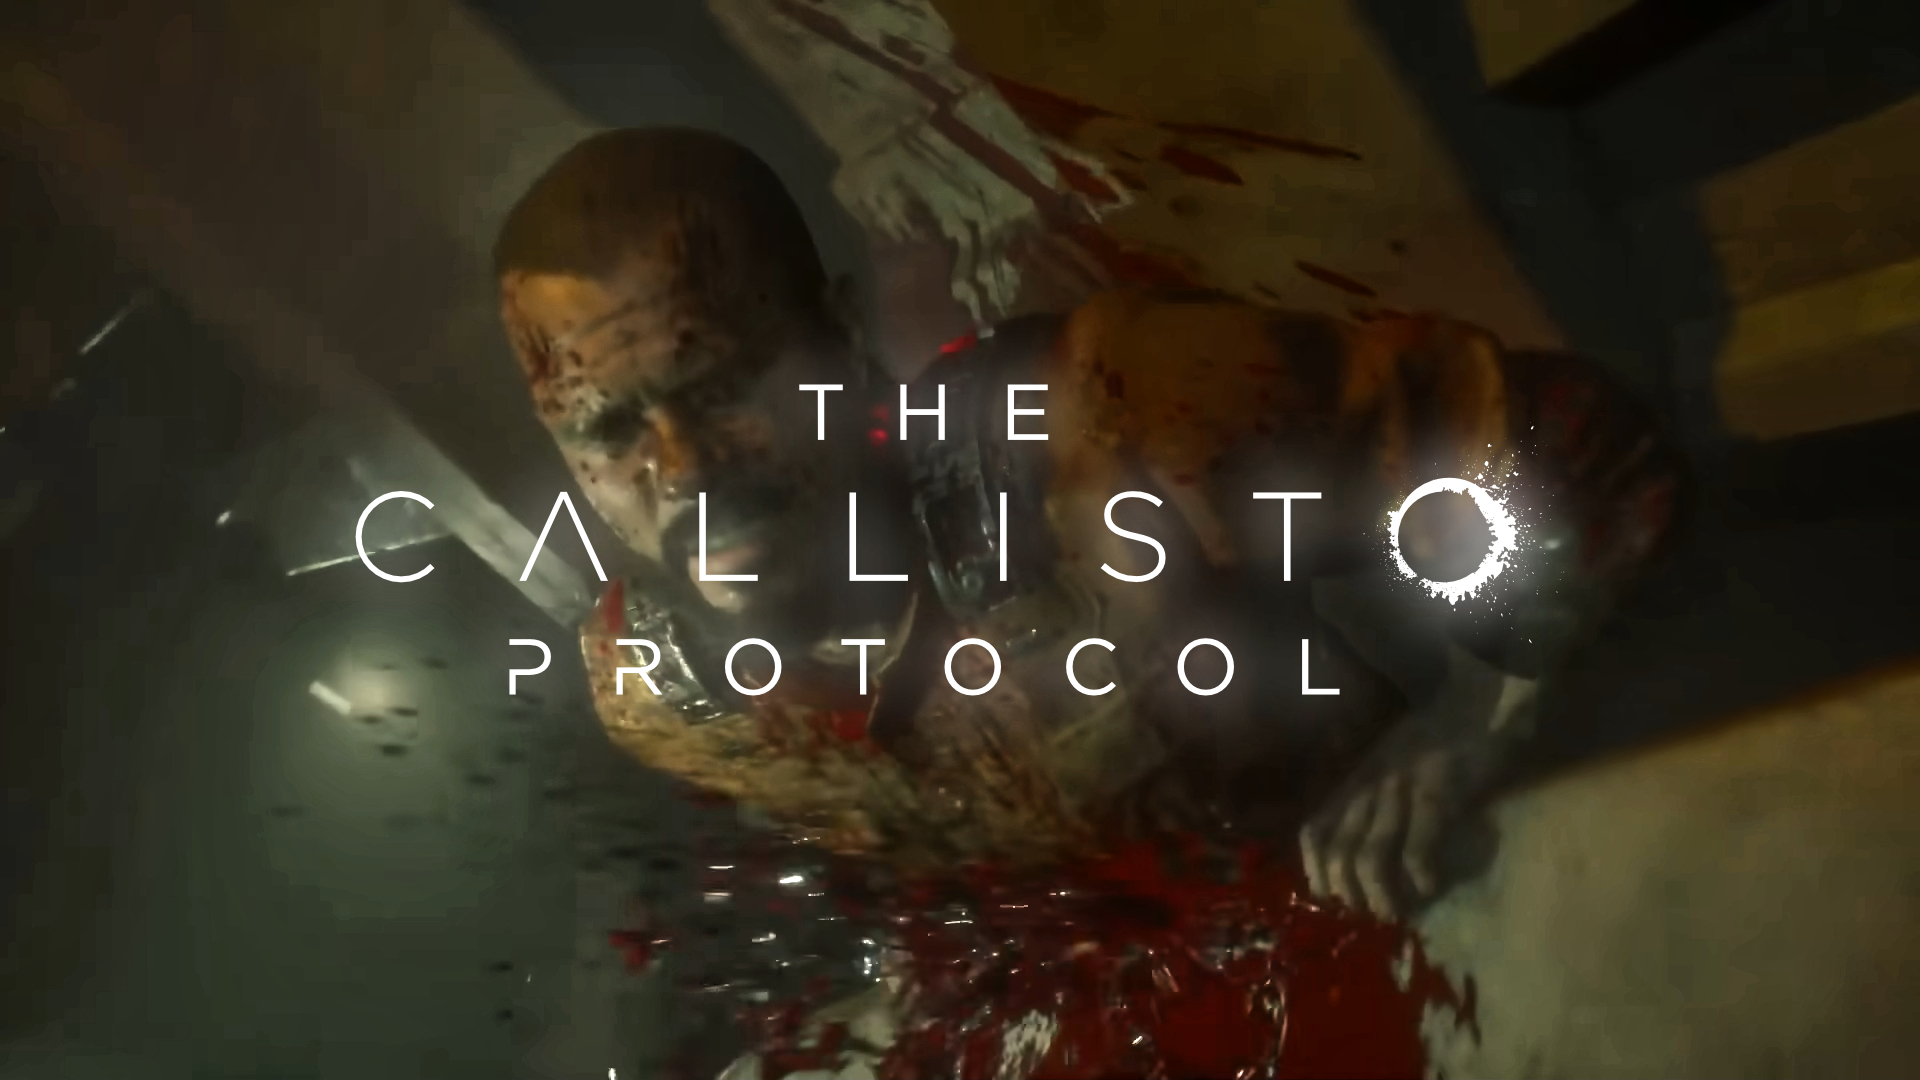 The Callisto Protocol Final Transmission DLC Gameplay Covered by